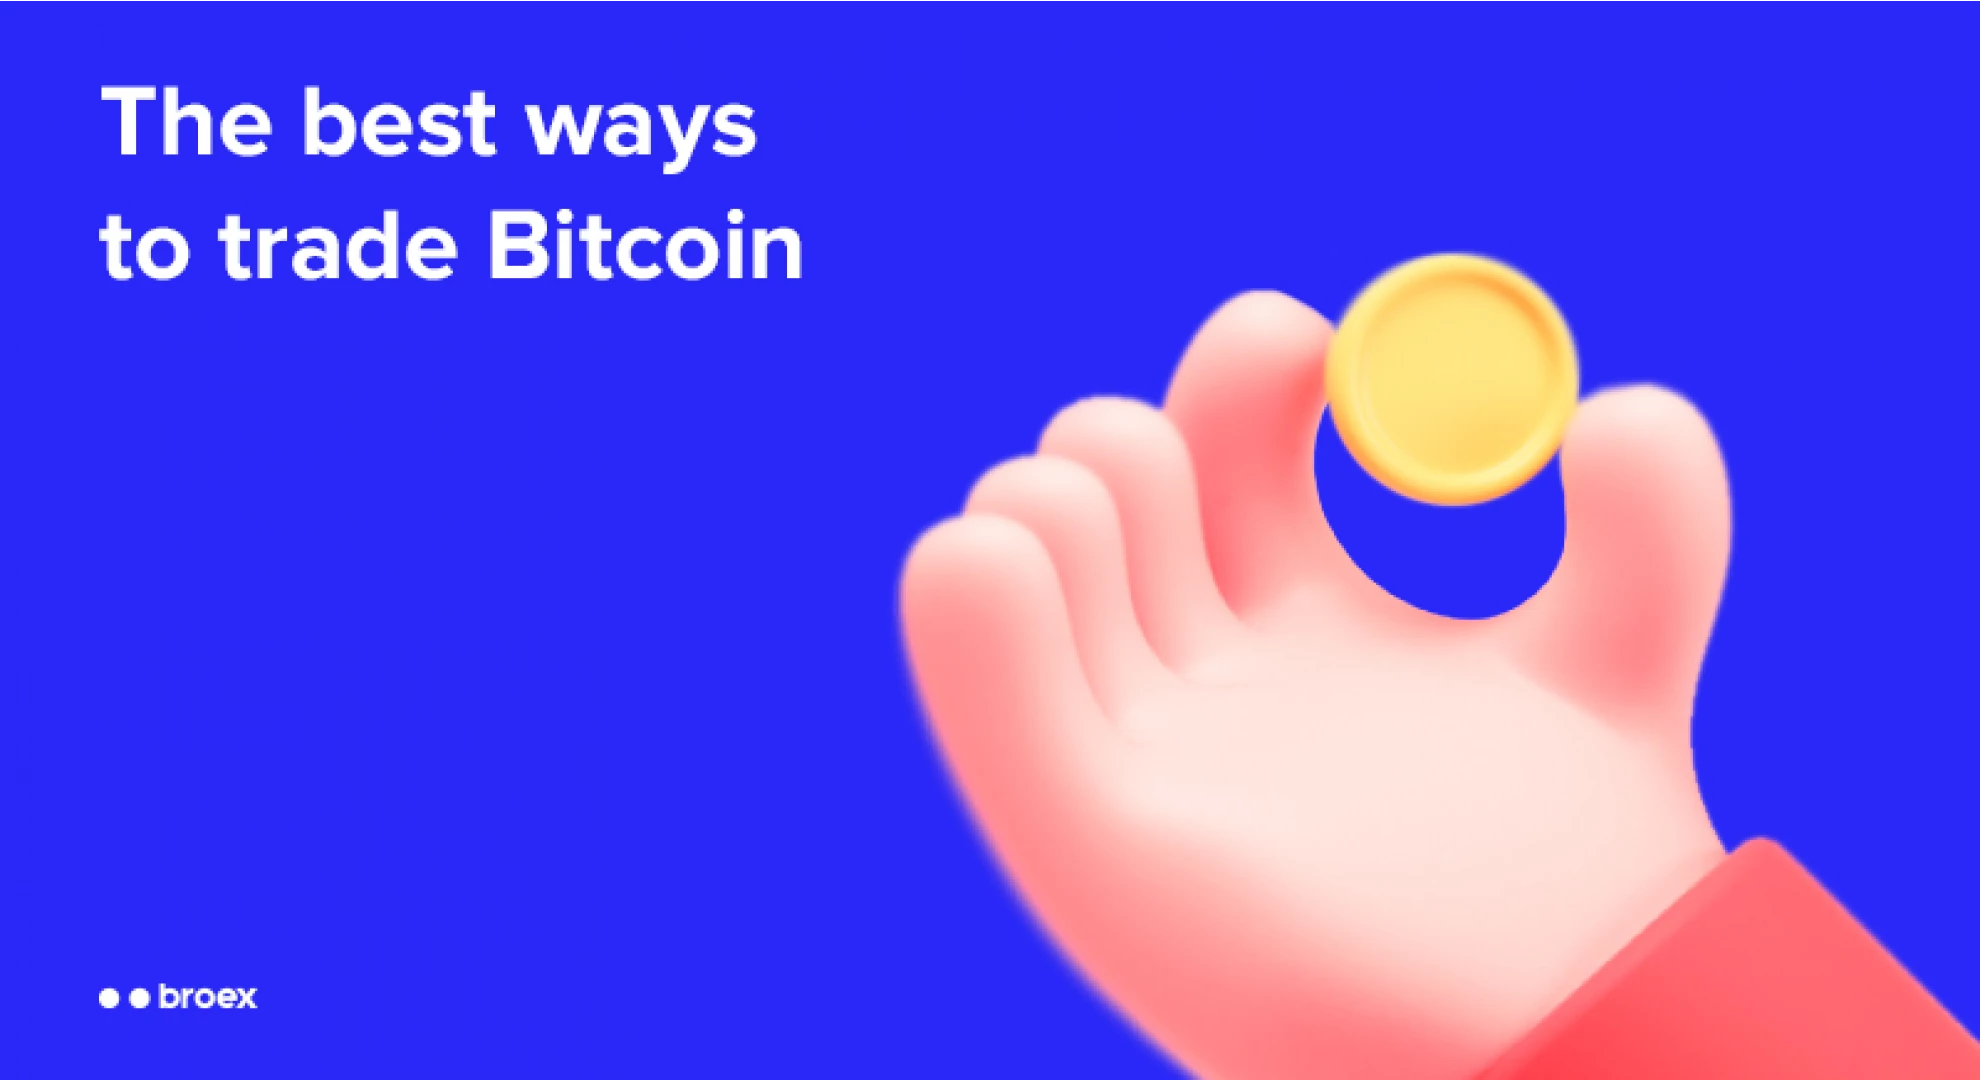 The best ways to trade Bitcoin